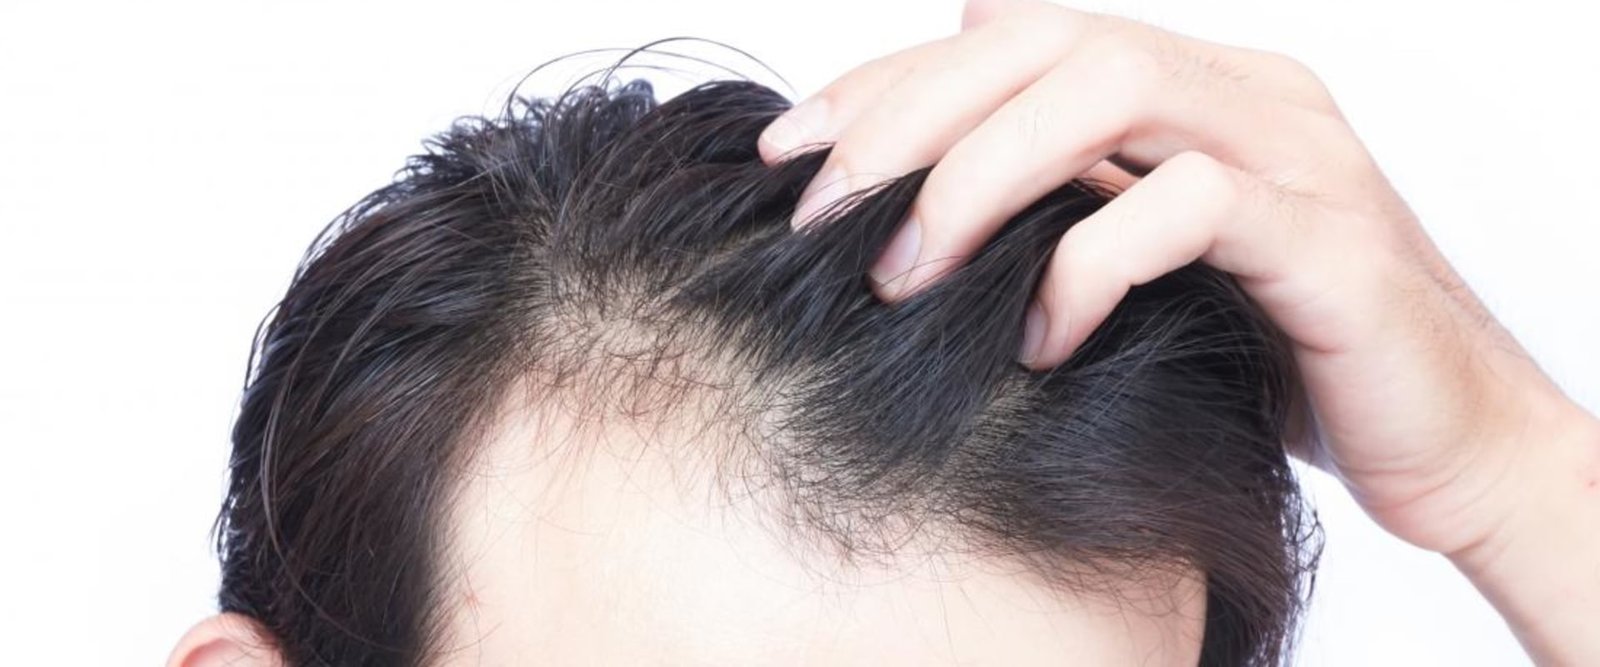 Can permanent hair loss grow back?